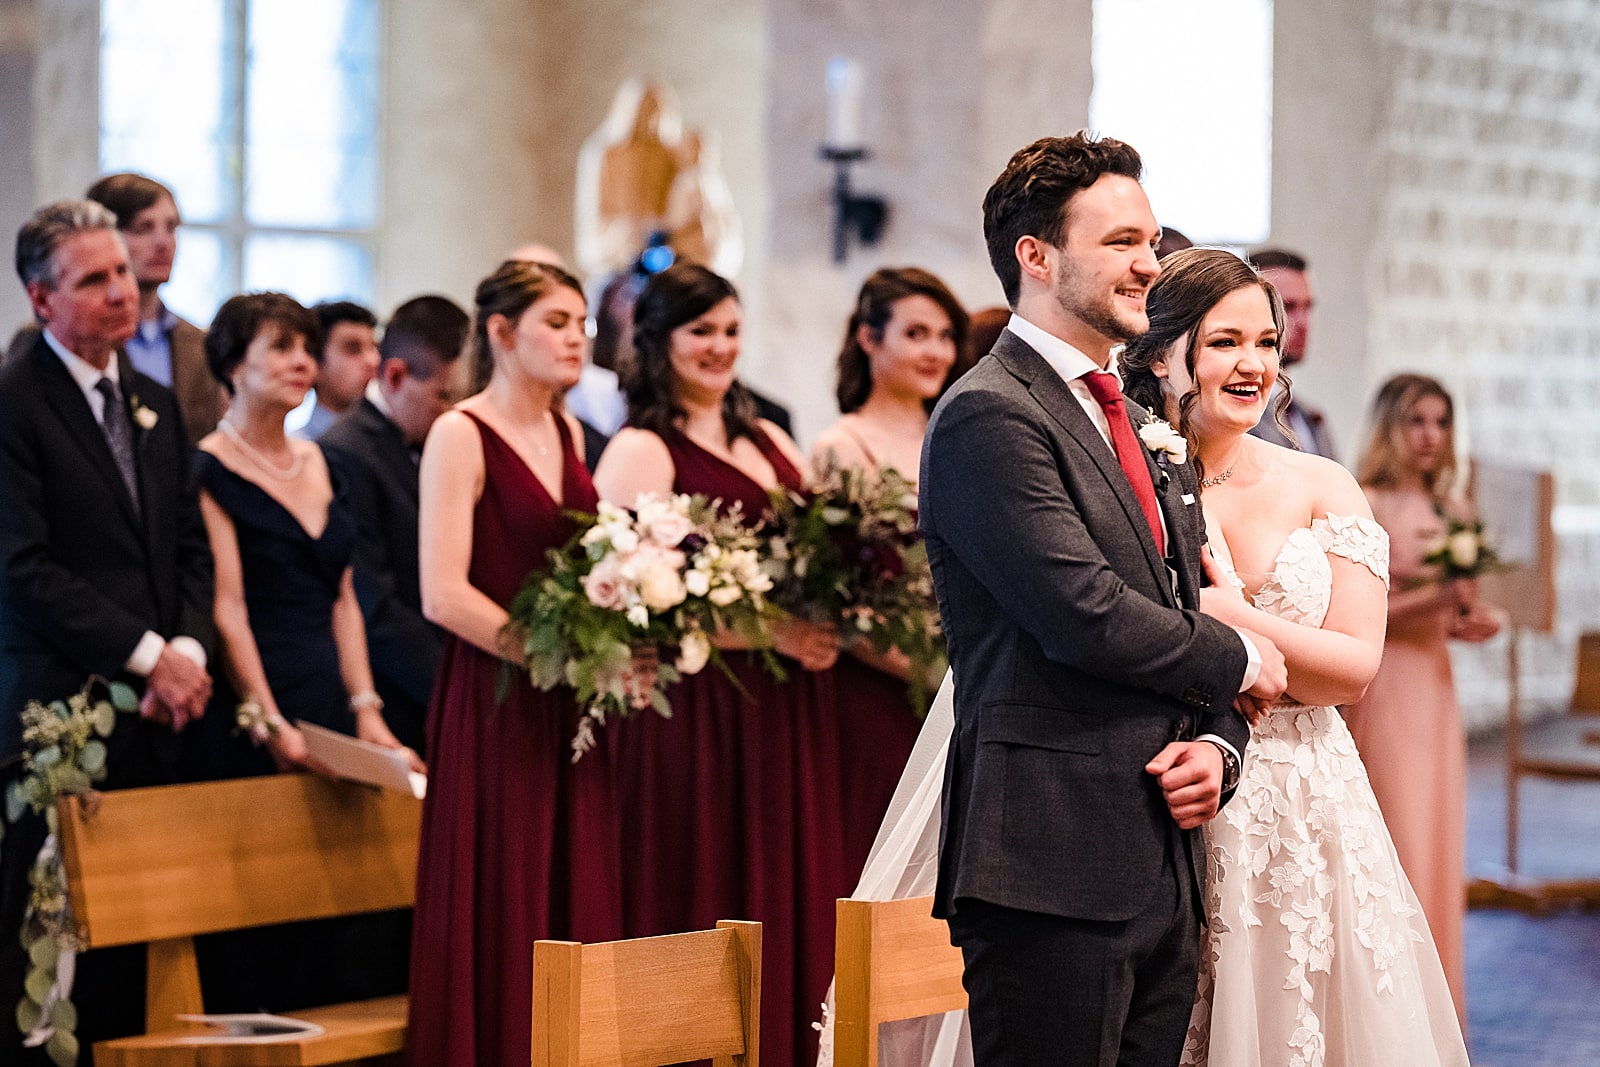 St. Francis of Assisi Church wedding in Raleigh, NC